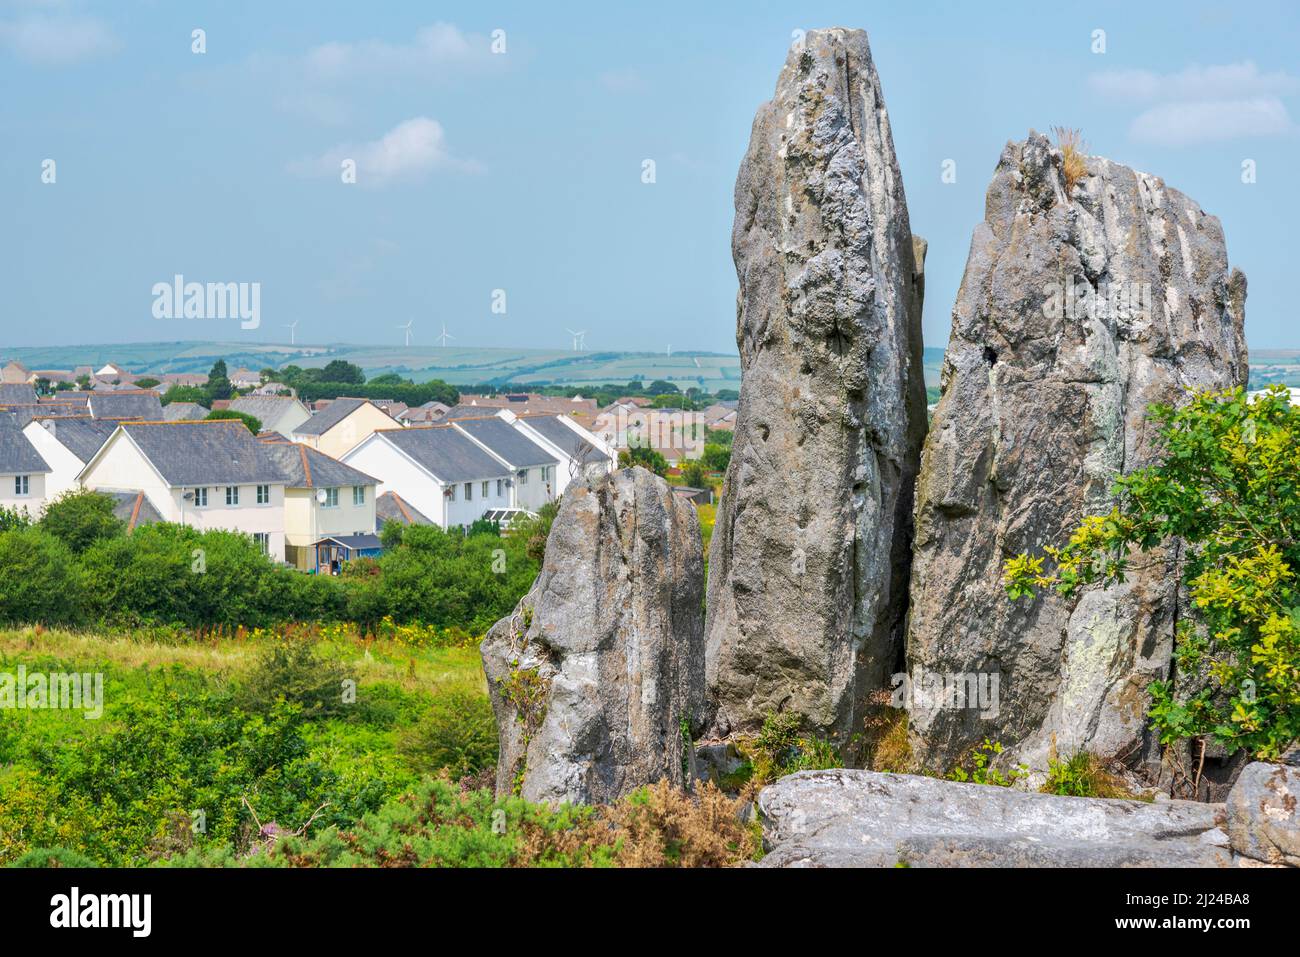 Residential houses,next to Roche Rock,a granite outcrop,a prominent granite landmark.Warm summer day in rural Cornwall. Stock Photo